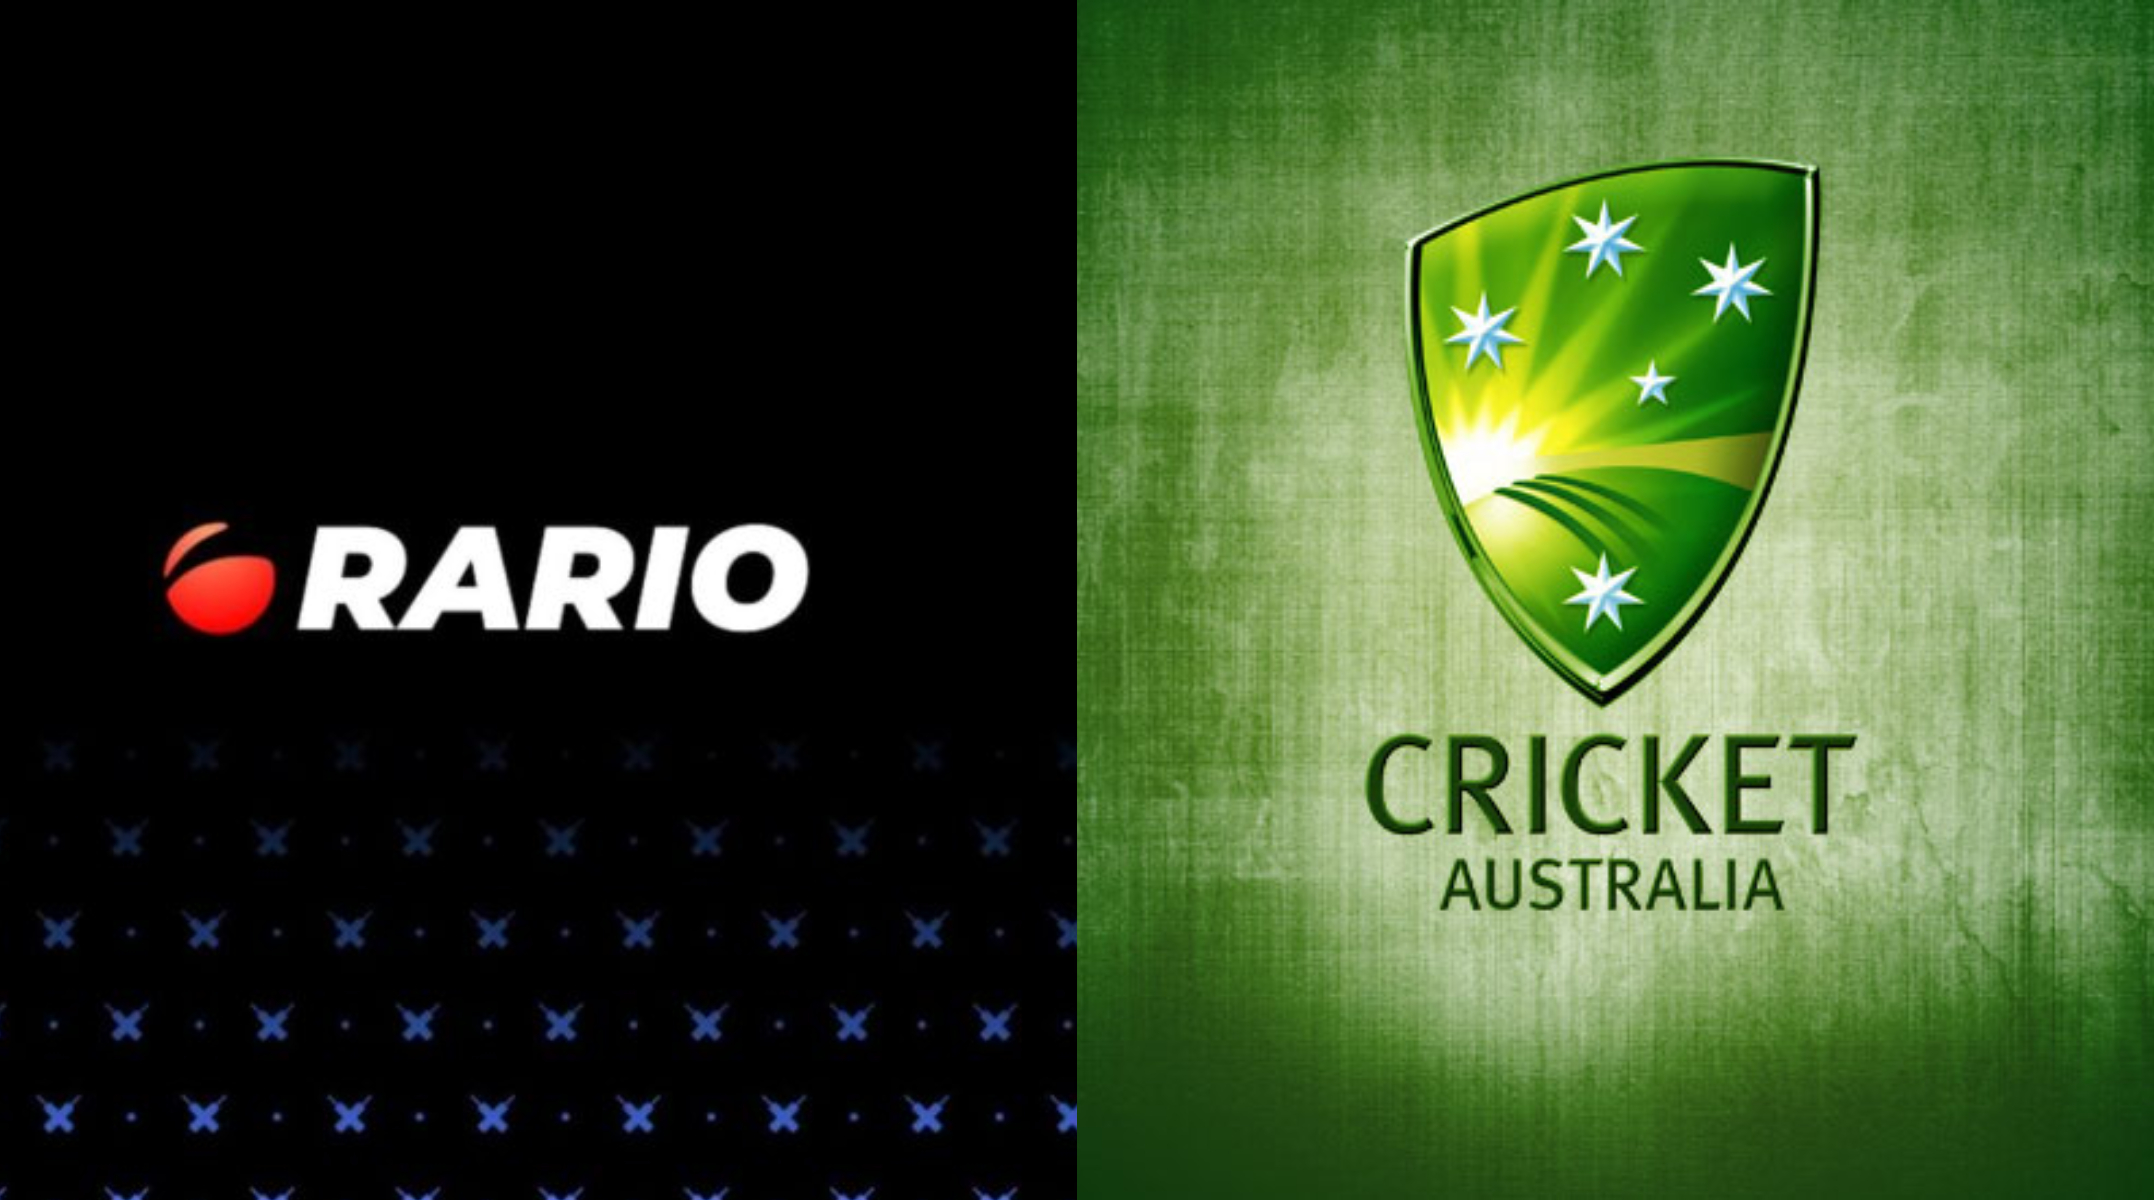 Five top moments of Australian Cricket that fans would love to see on Cricket NFT platform Rario